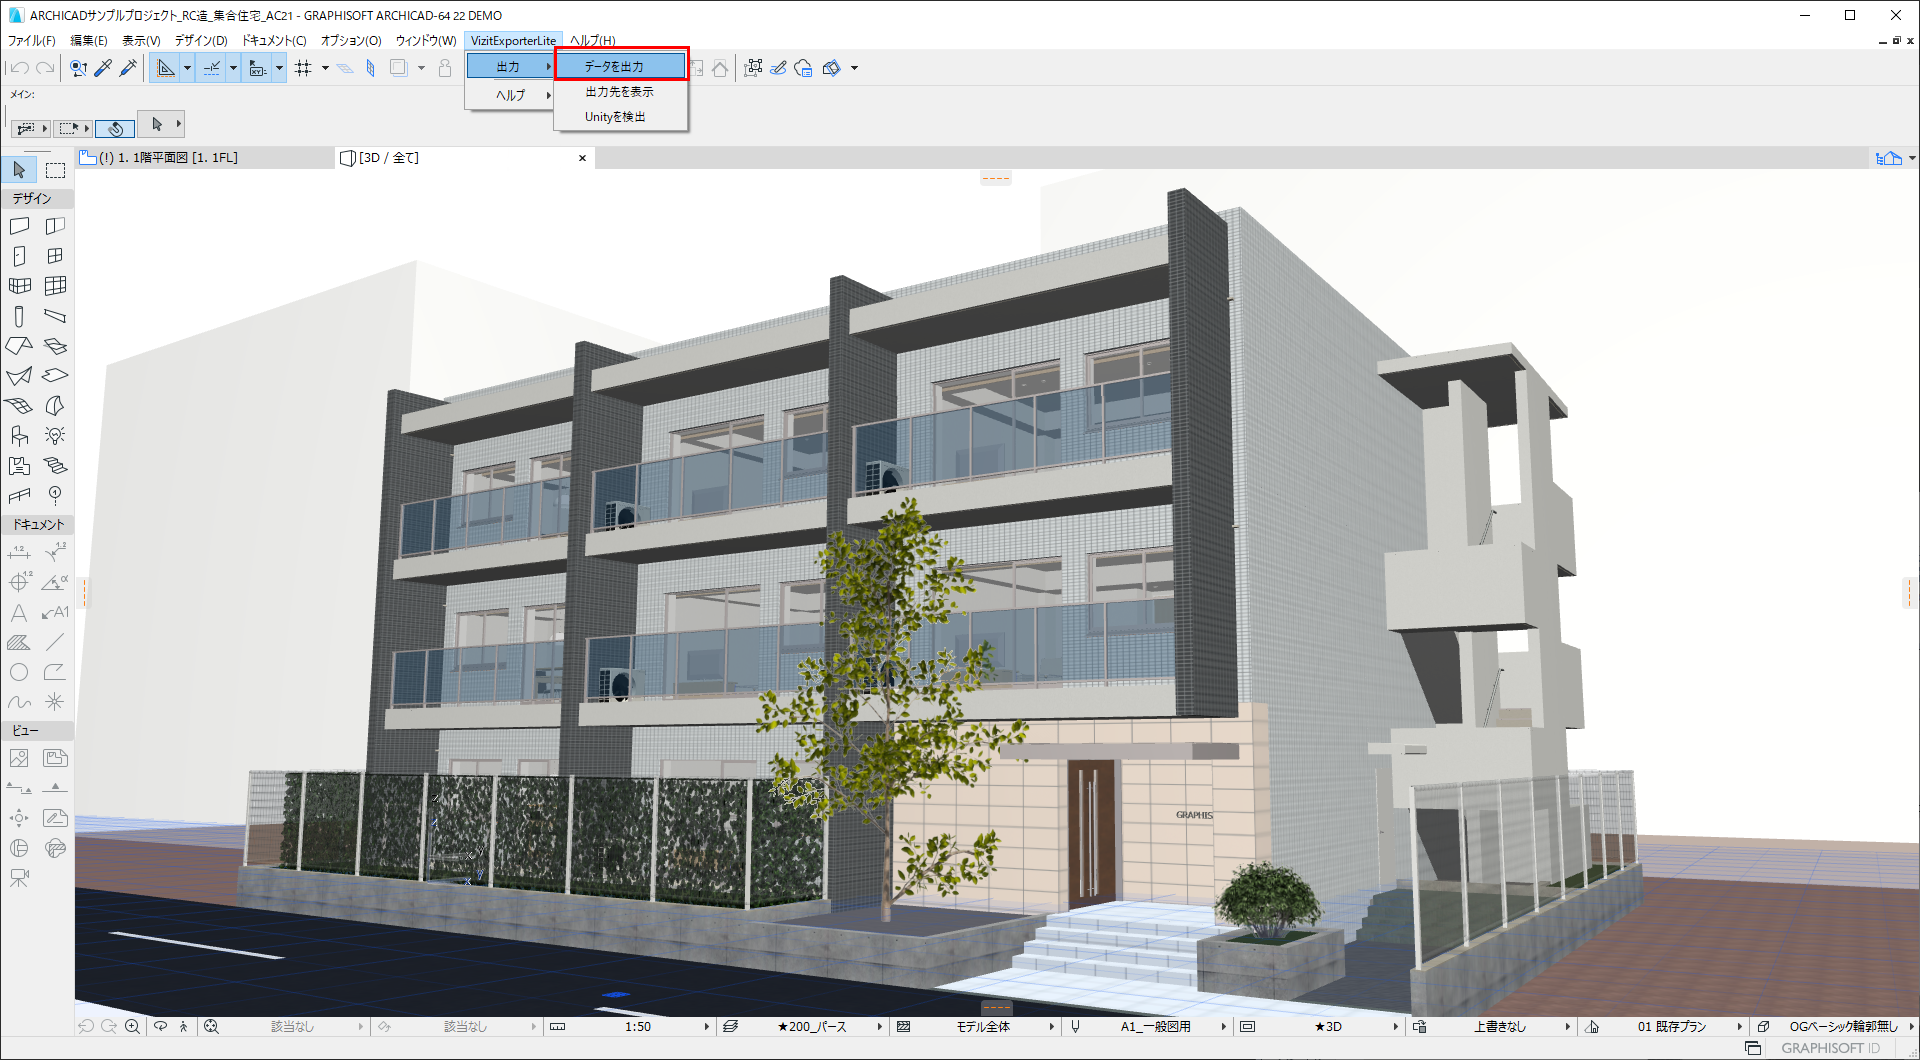 archicad to lumion bridge for archicad 20